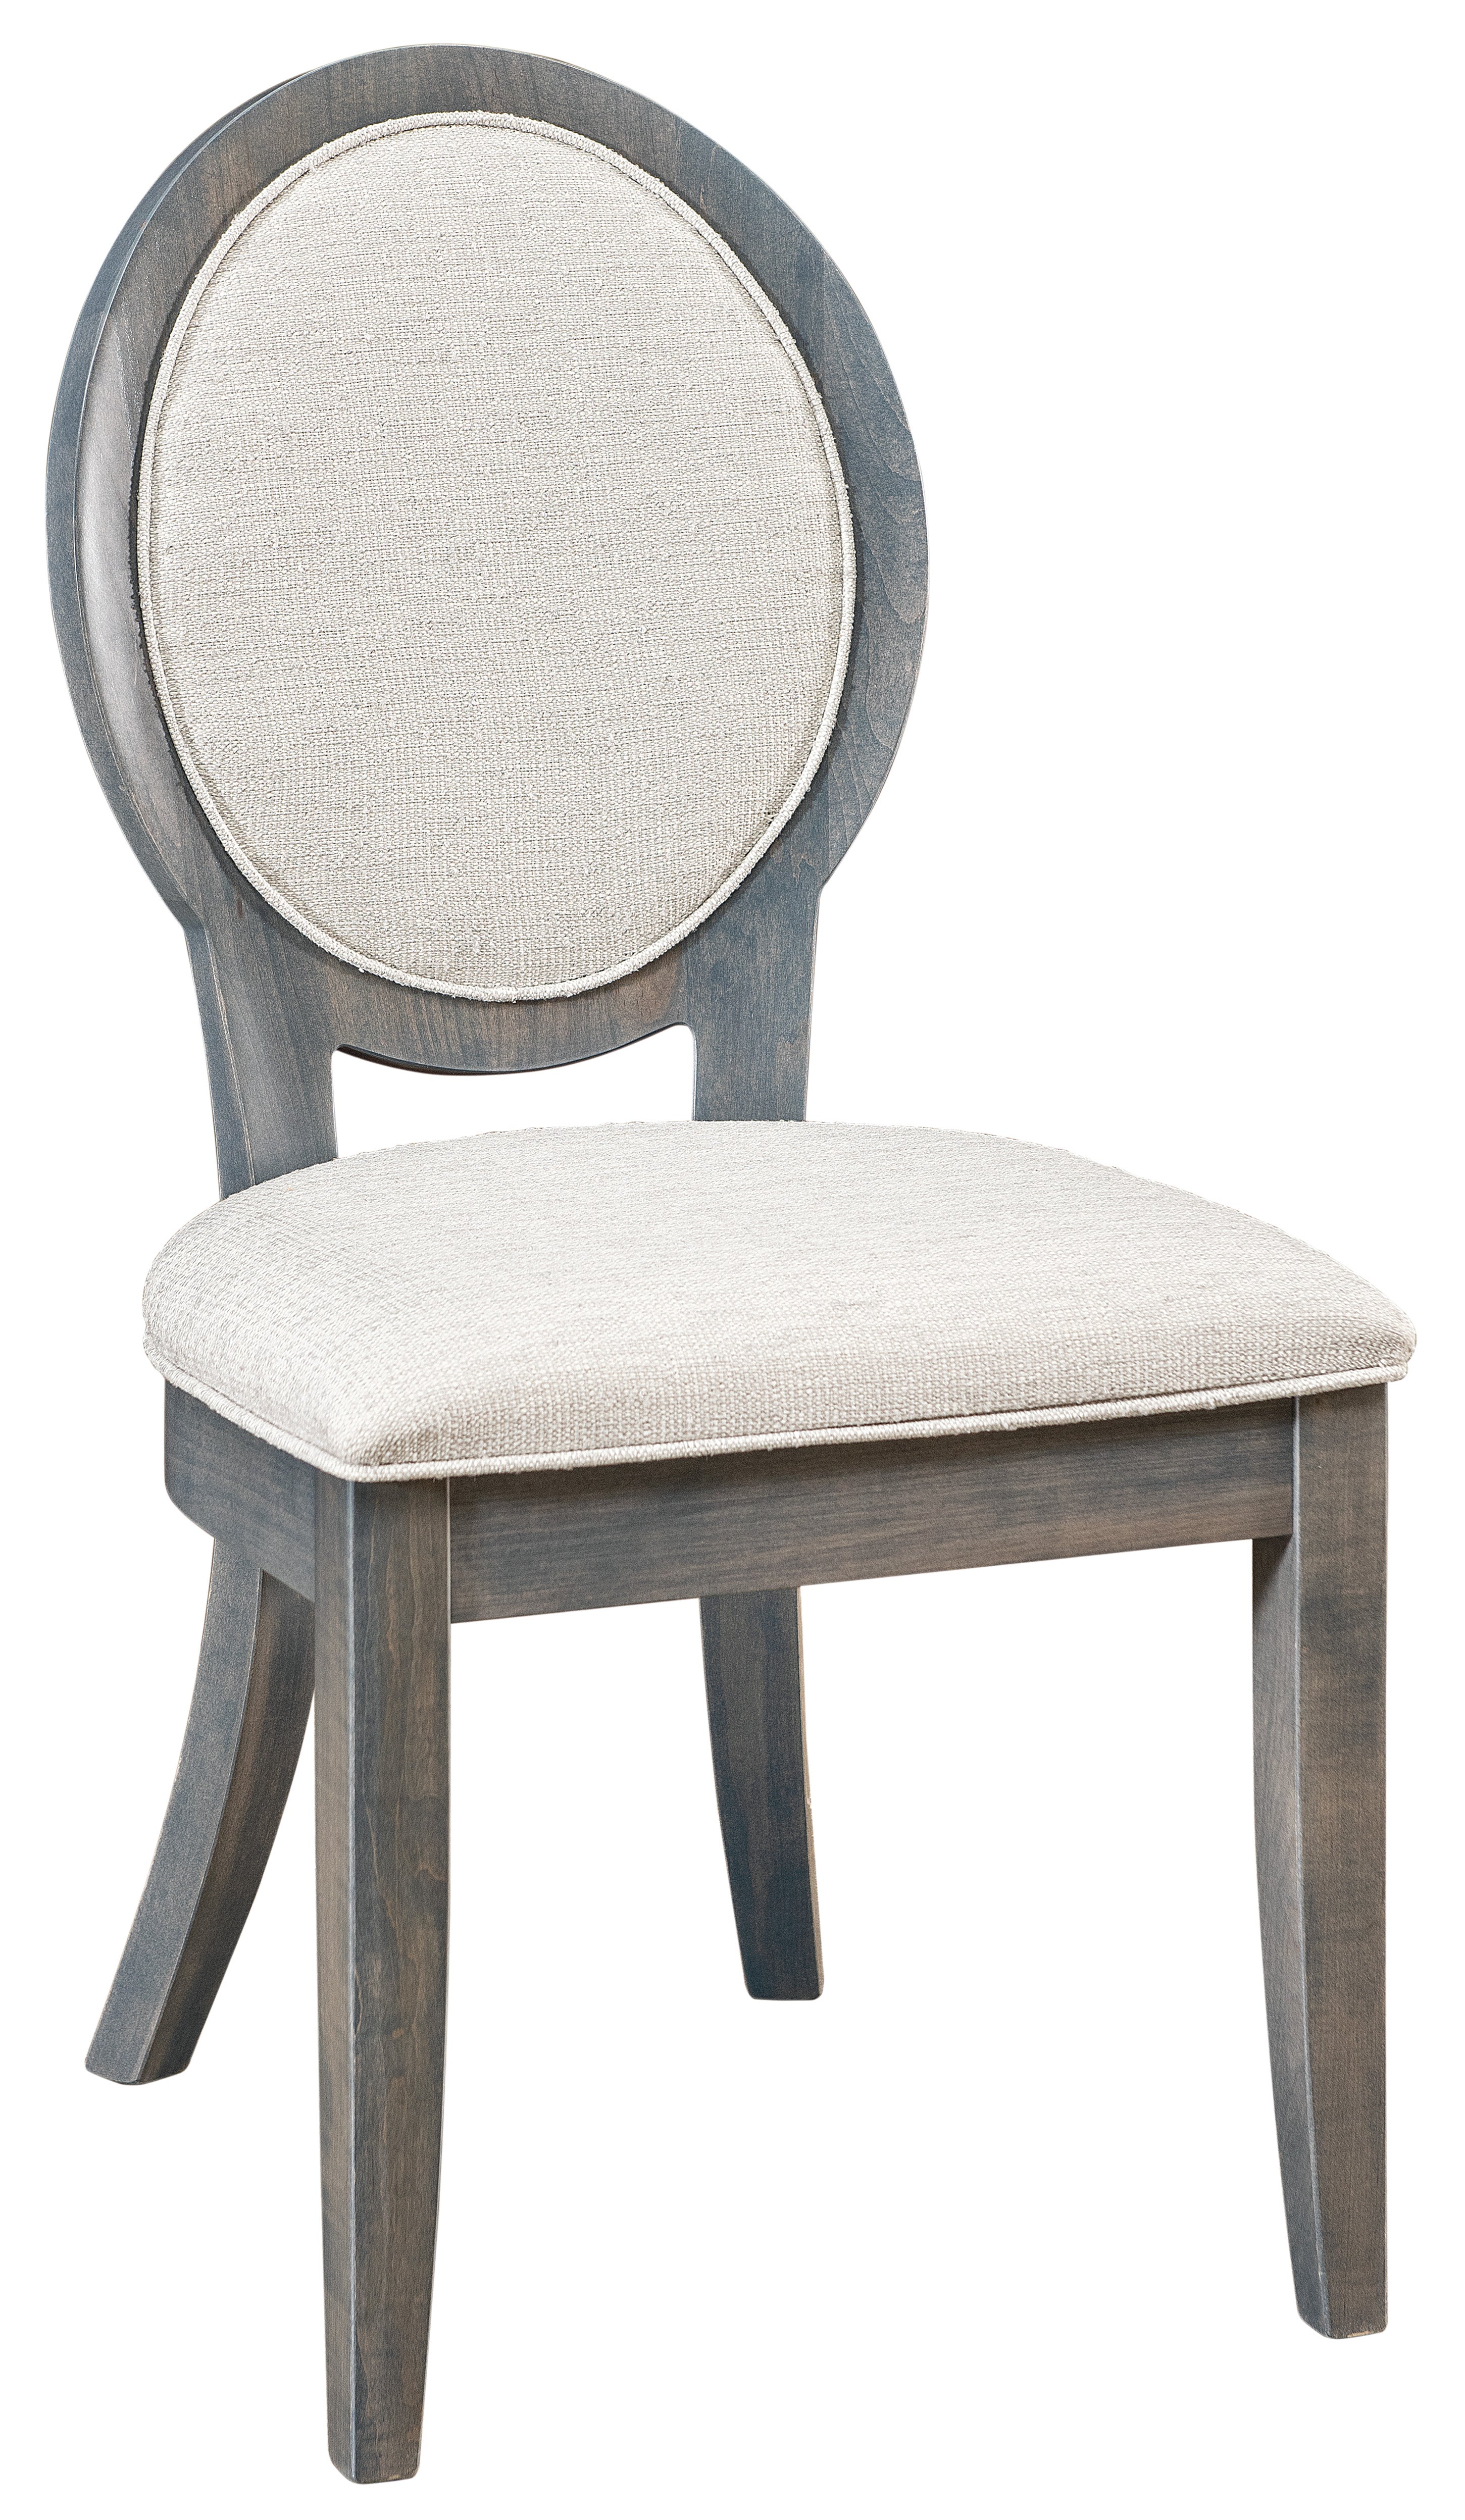 dawson upholstered dining chair in brown maple wood, gray flannel stain and coconut fabric